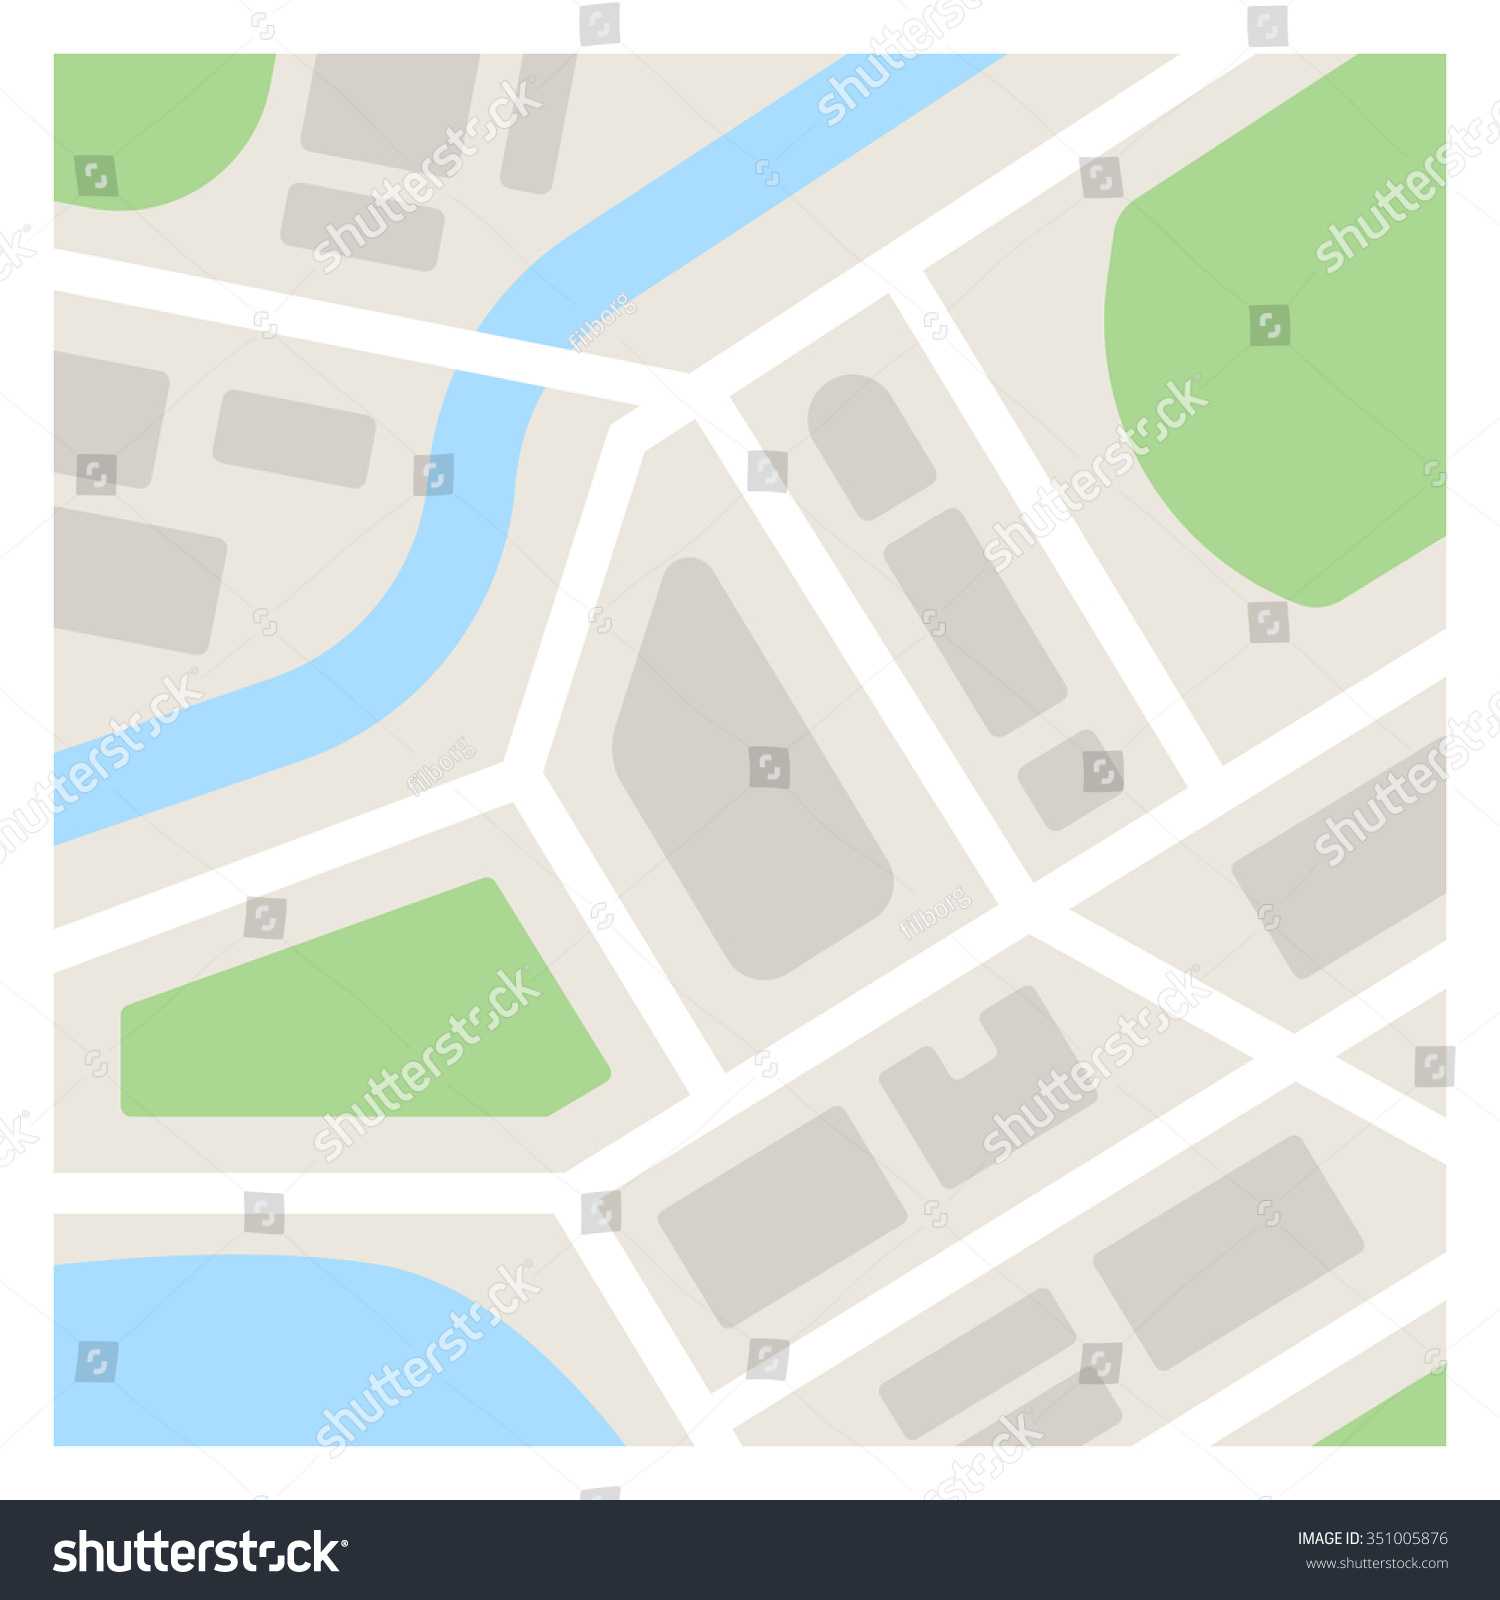 Vector Map Template Illustration Simple Flat Stock Vector Pertaining To Blank City Map Template